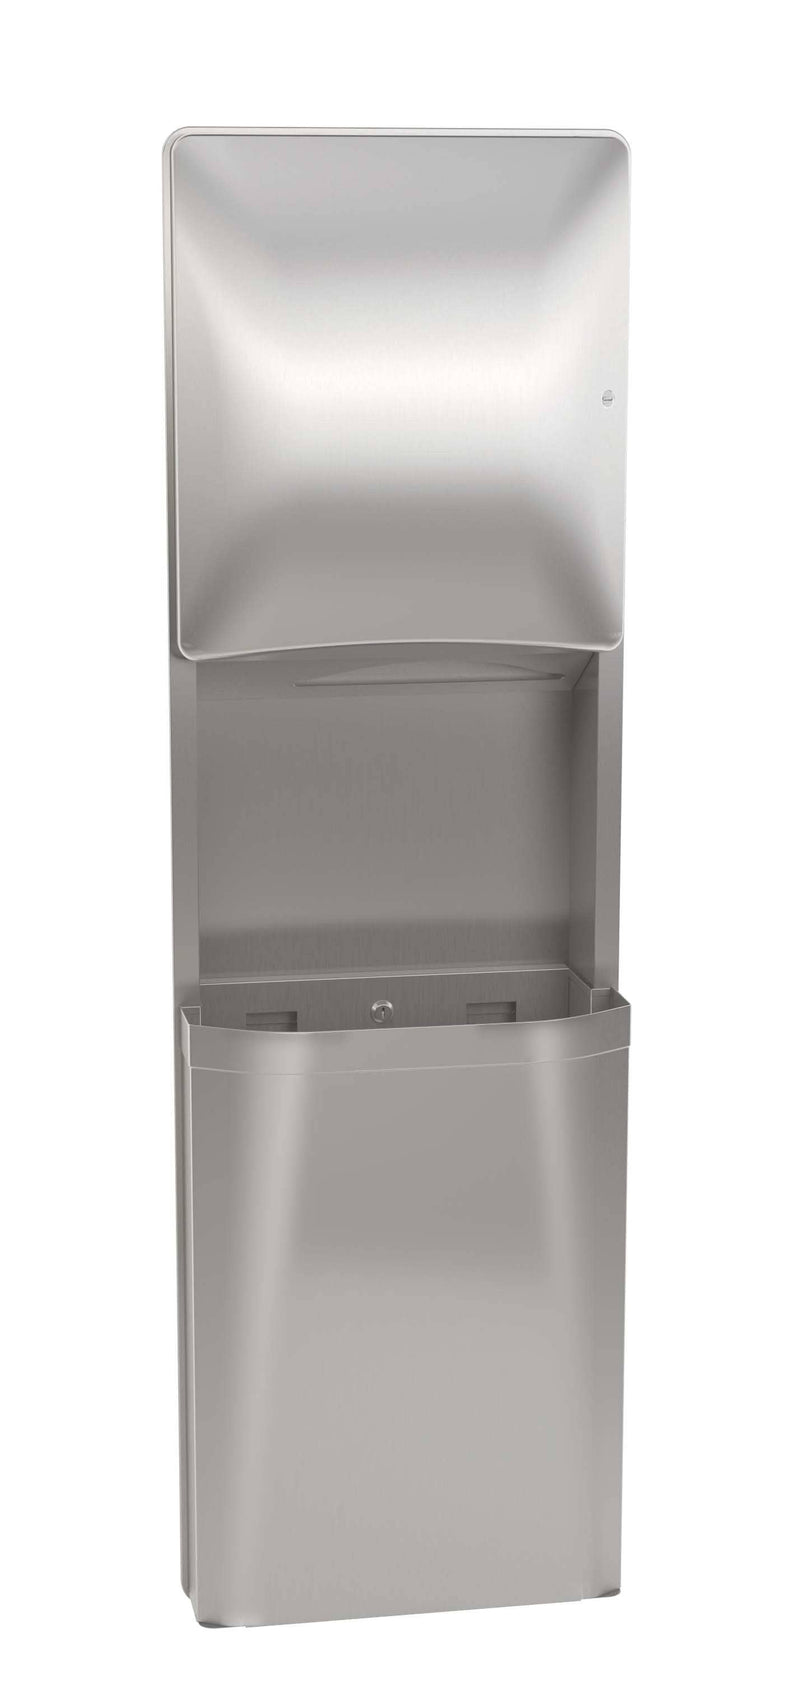 Bradley 2A15-36 Combination Toilet Paper Dispenser/Waste Receptacle, Recessed-Mounted, Stainless Steel - TotalRestroom.com